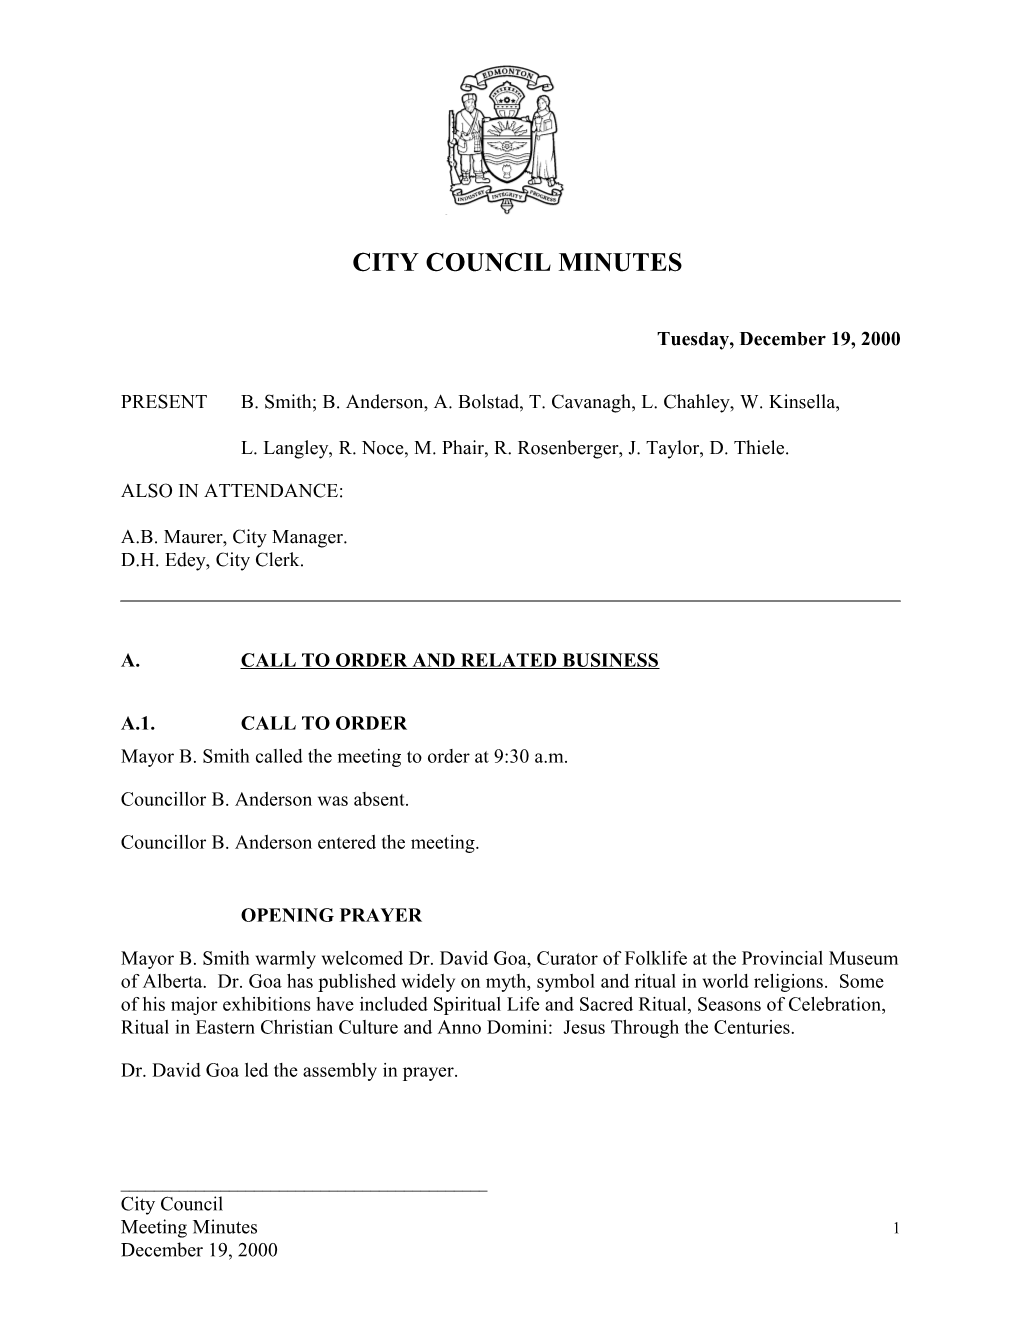 Minutes for City Council December 19, 2000 Meeting